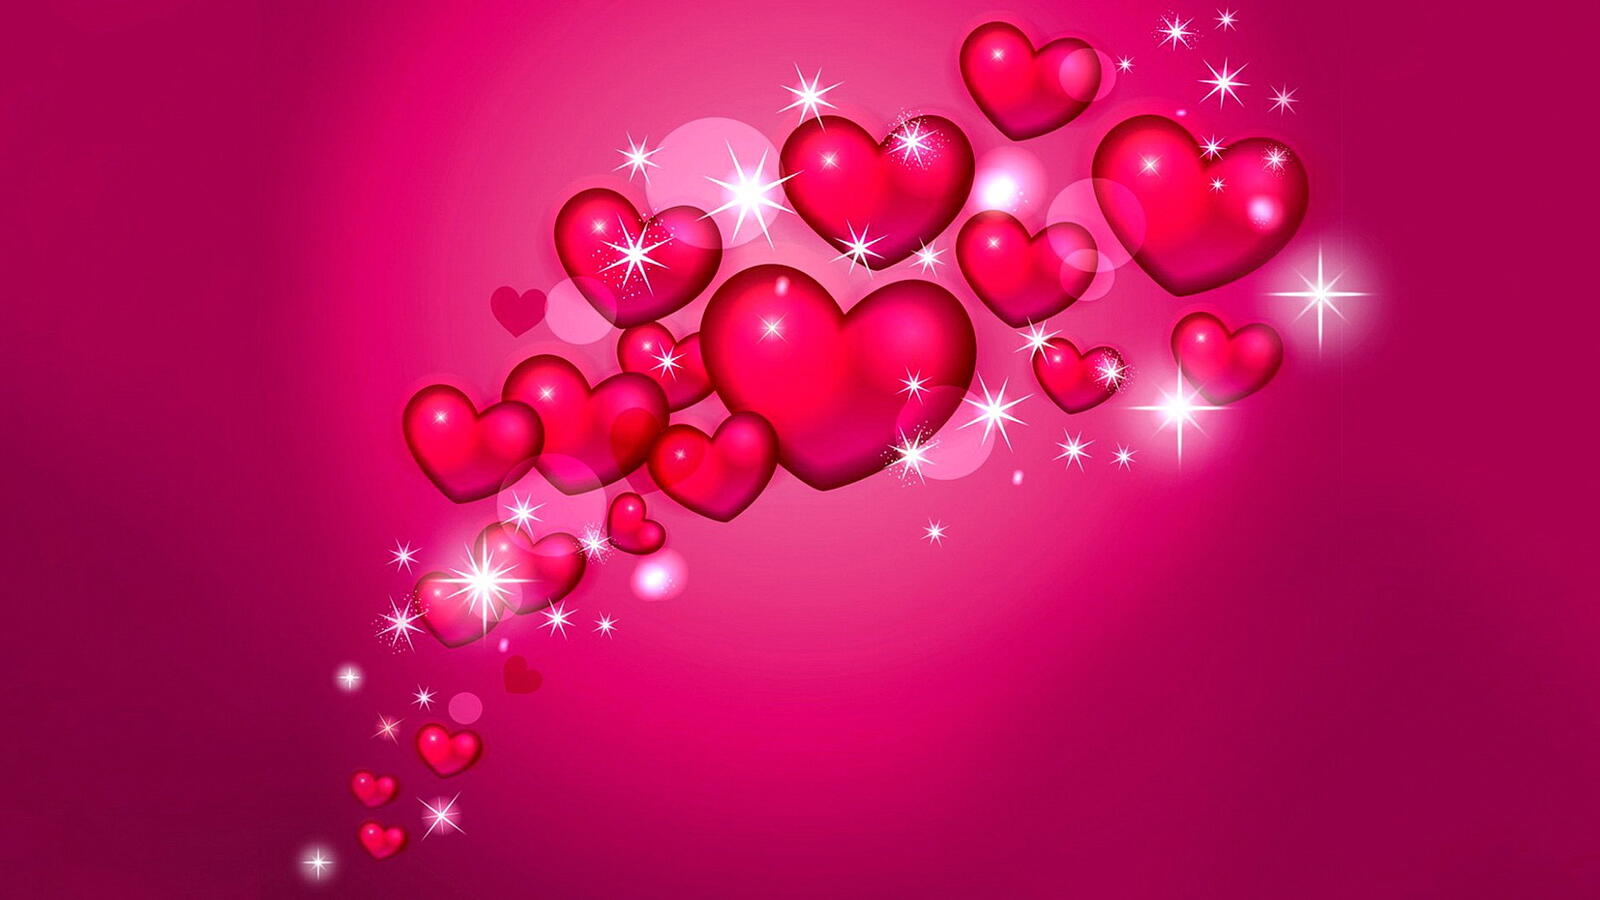 Free photo Hearts and highlights on a pink background